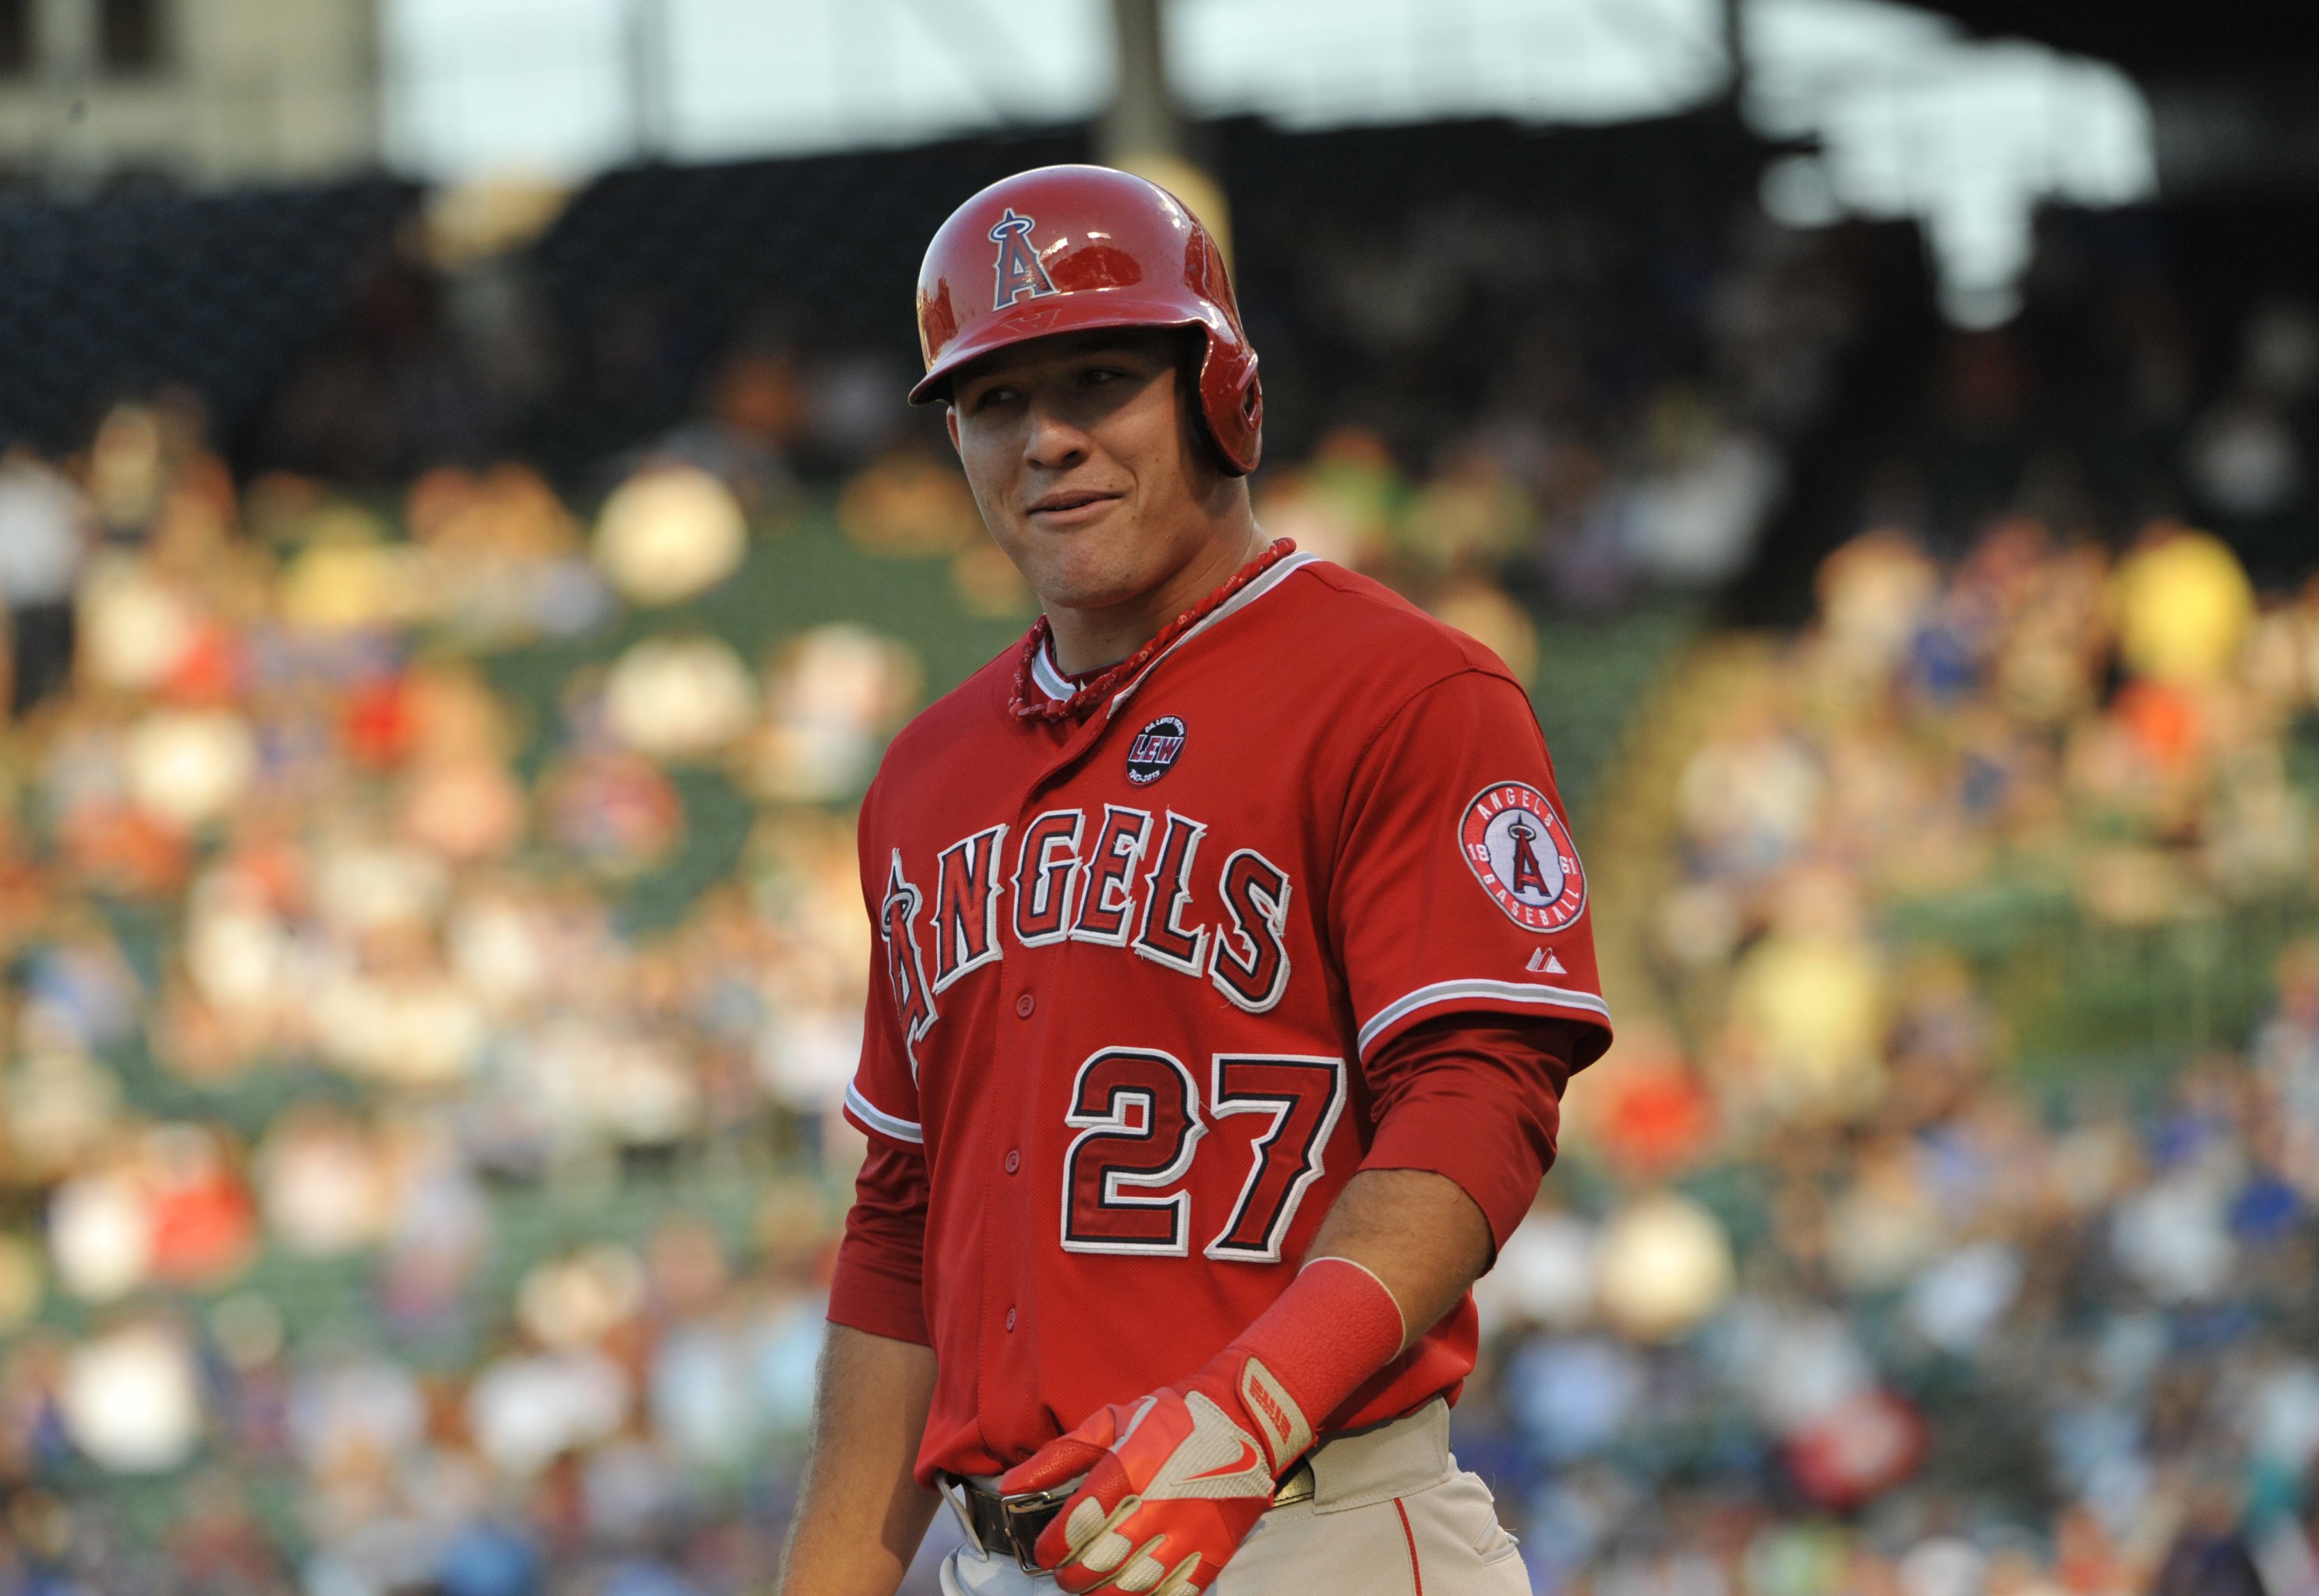 Chances Millville, NJ, native Mike Trout is traded Phillies?